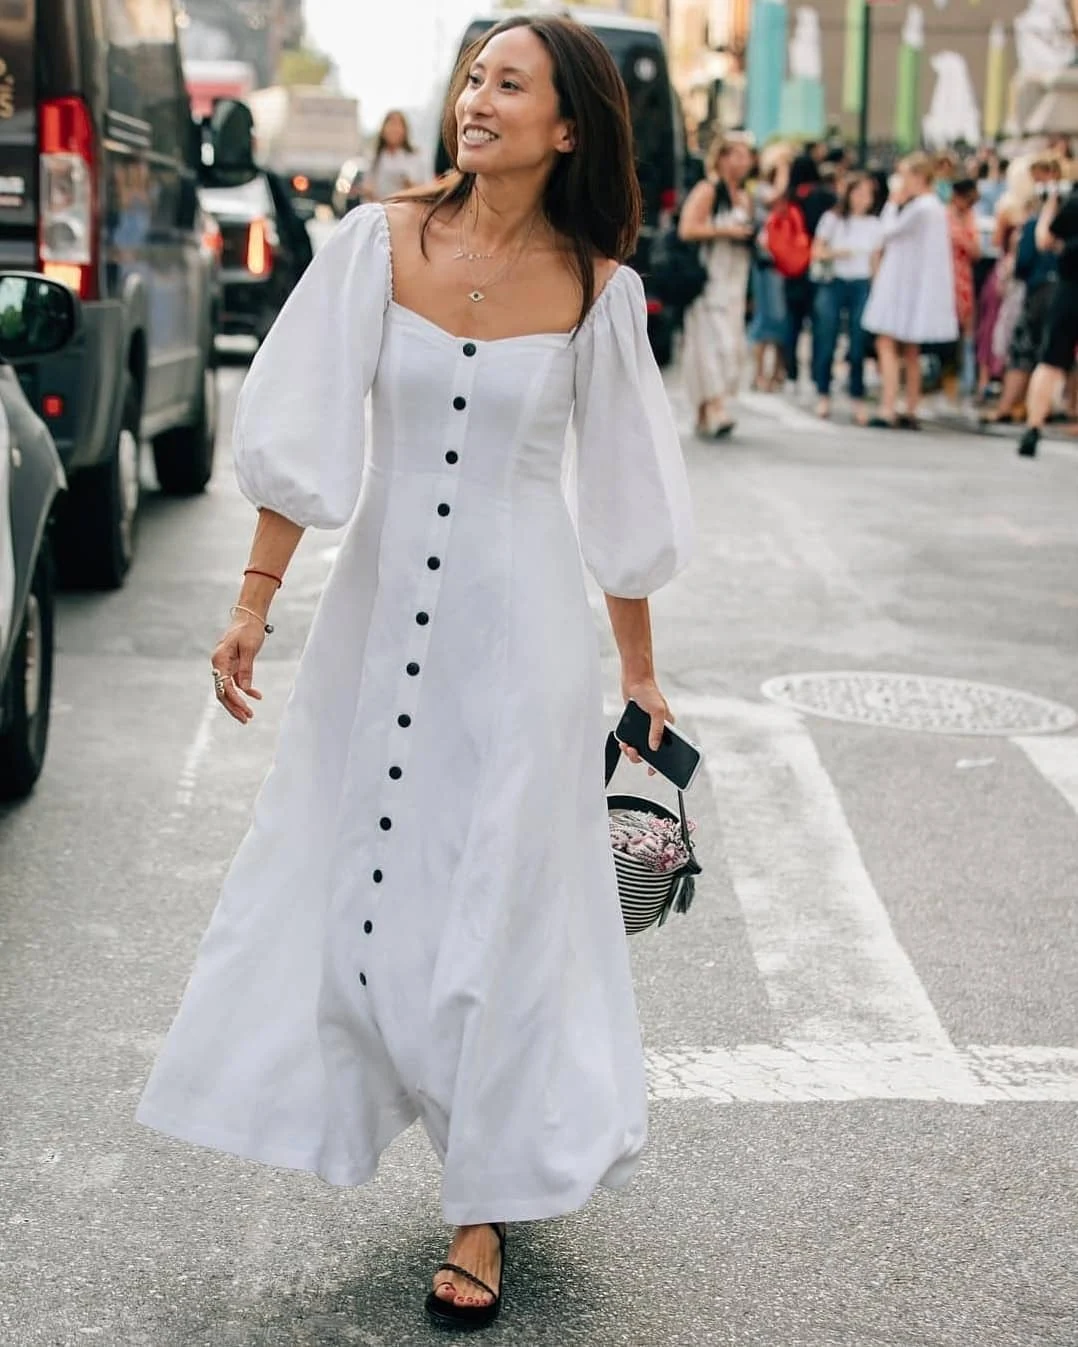 35 of the prettiest easy white dresses to wear during hot summer days